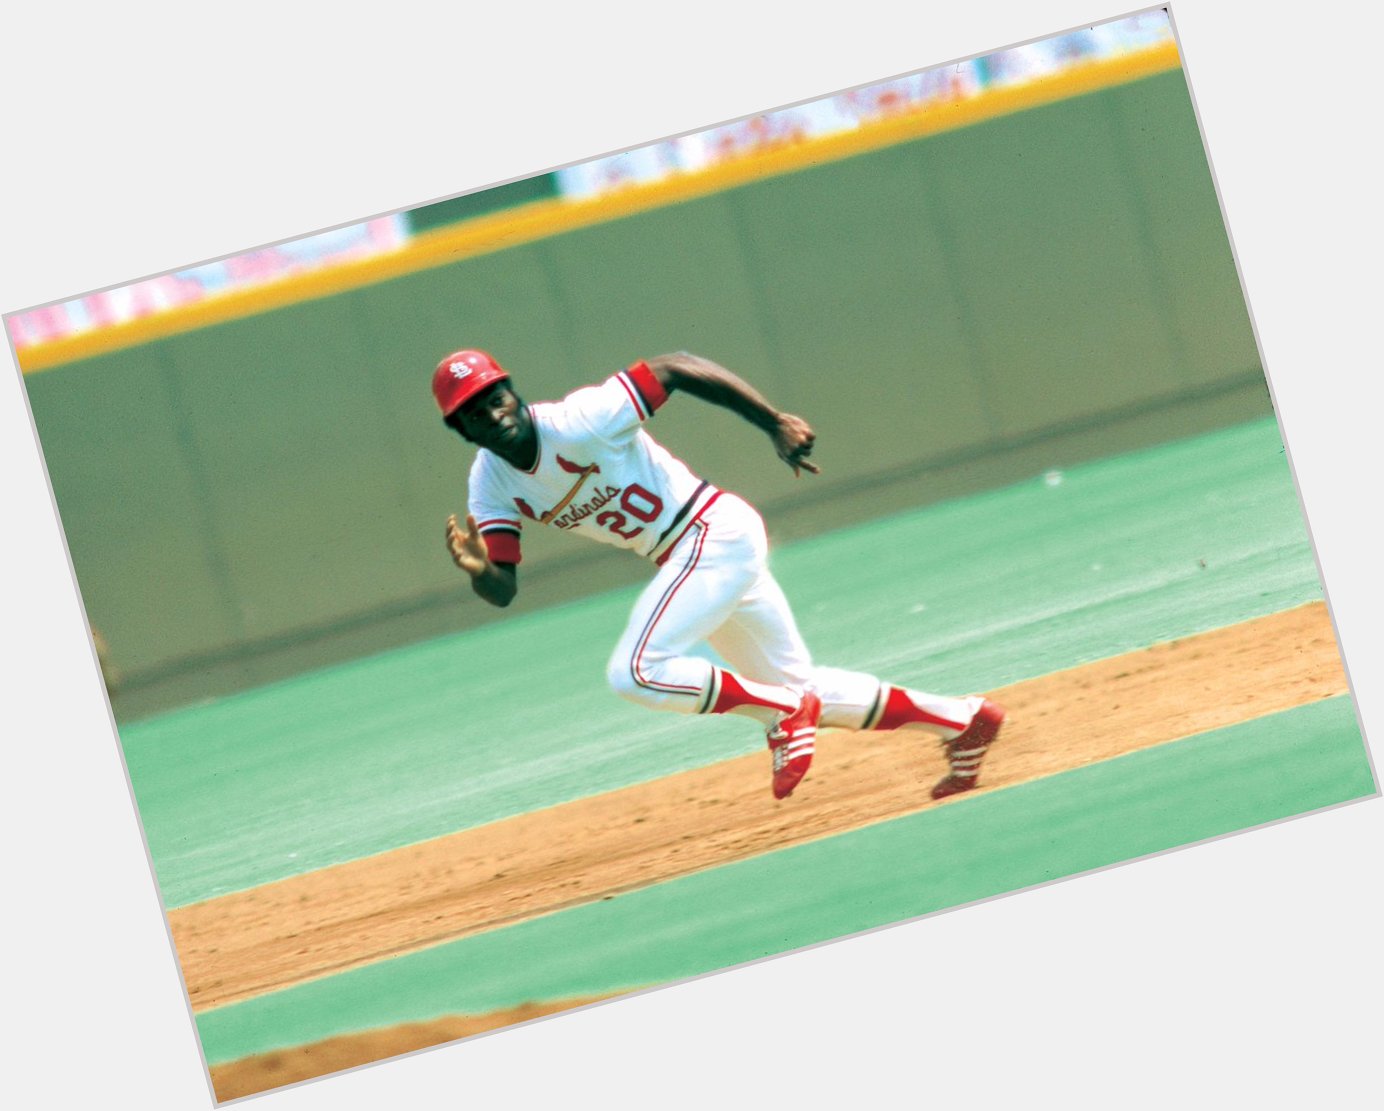 REmessage to wish one of the best base stealers in all of baseball, Lou Brock, a happy 76th birthday! 